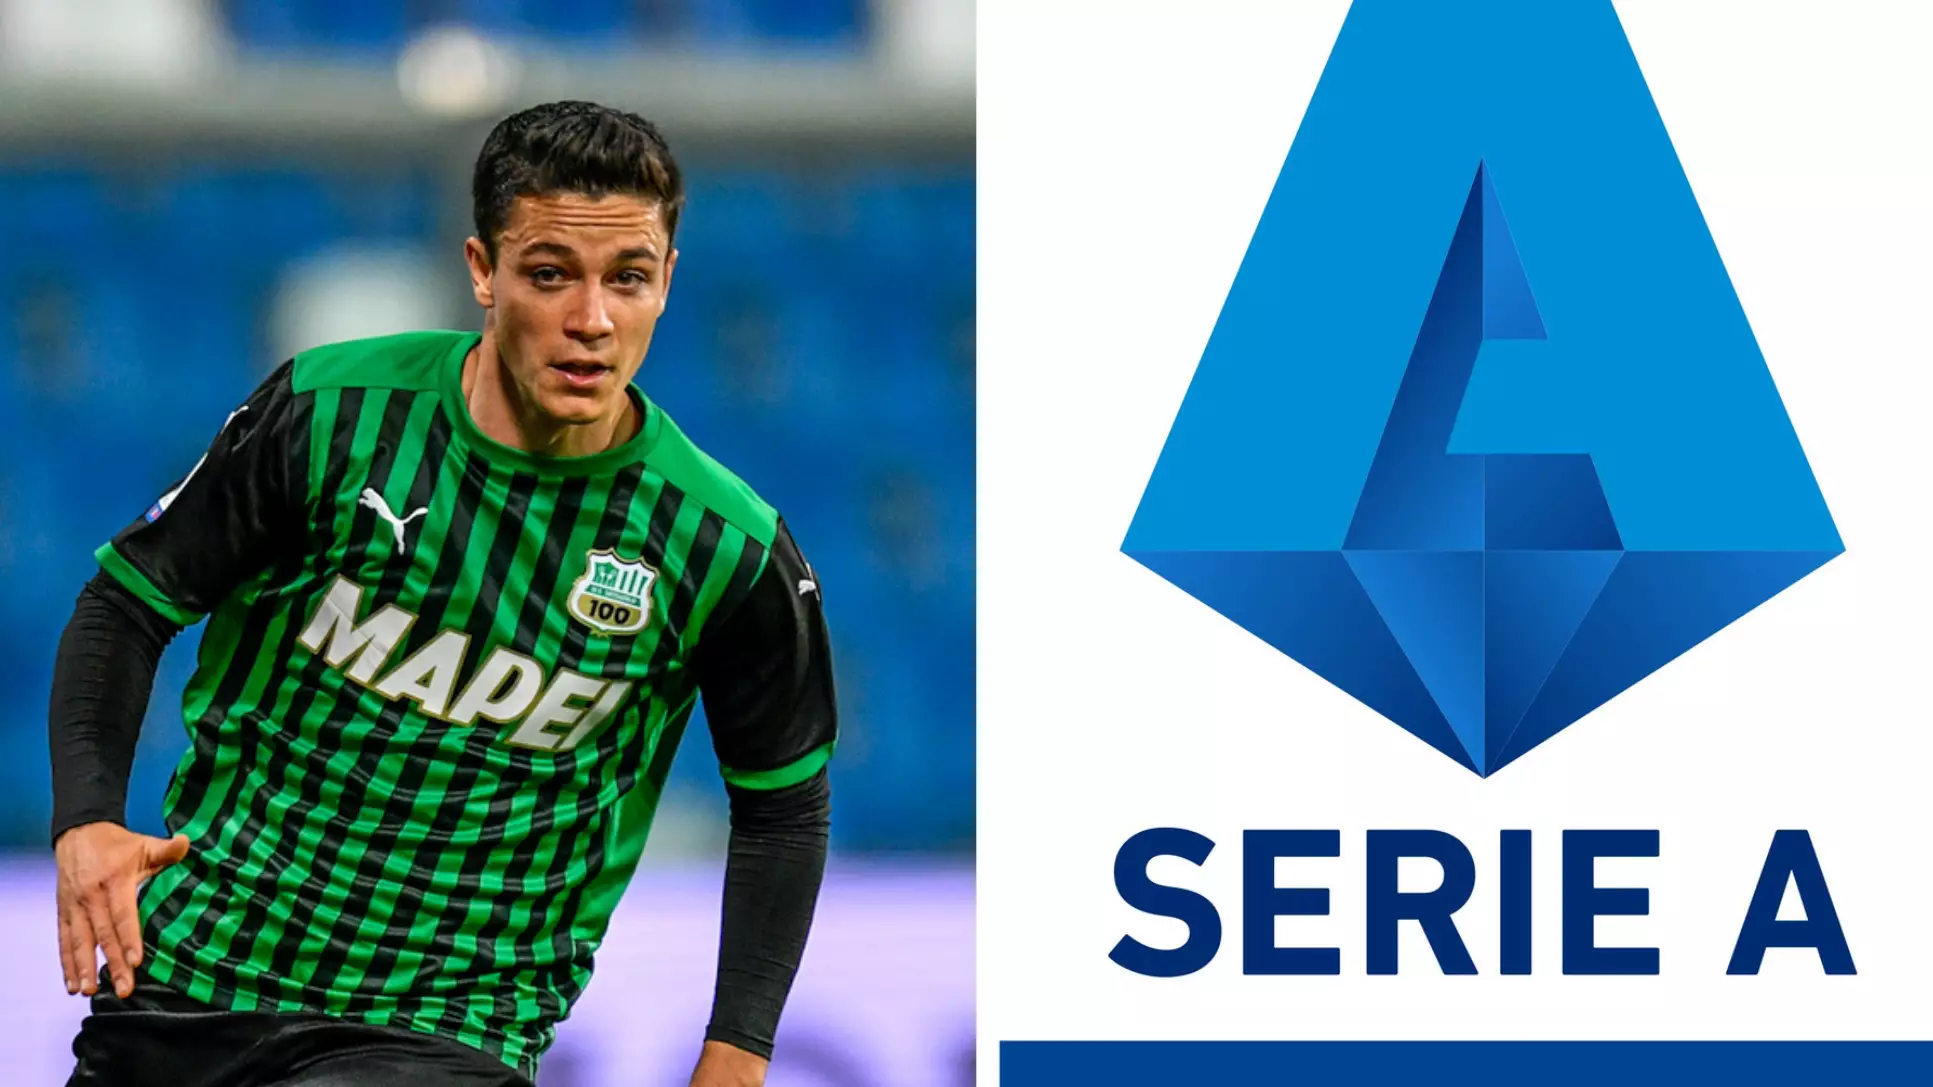 Serie A Bans Teams From Wearing Green Kits From 2022/23 Season Amid Concerns That Players Would Blend In With The Grass